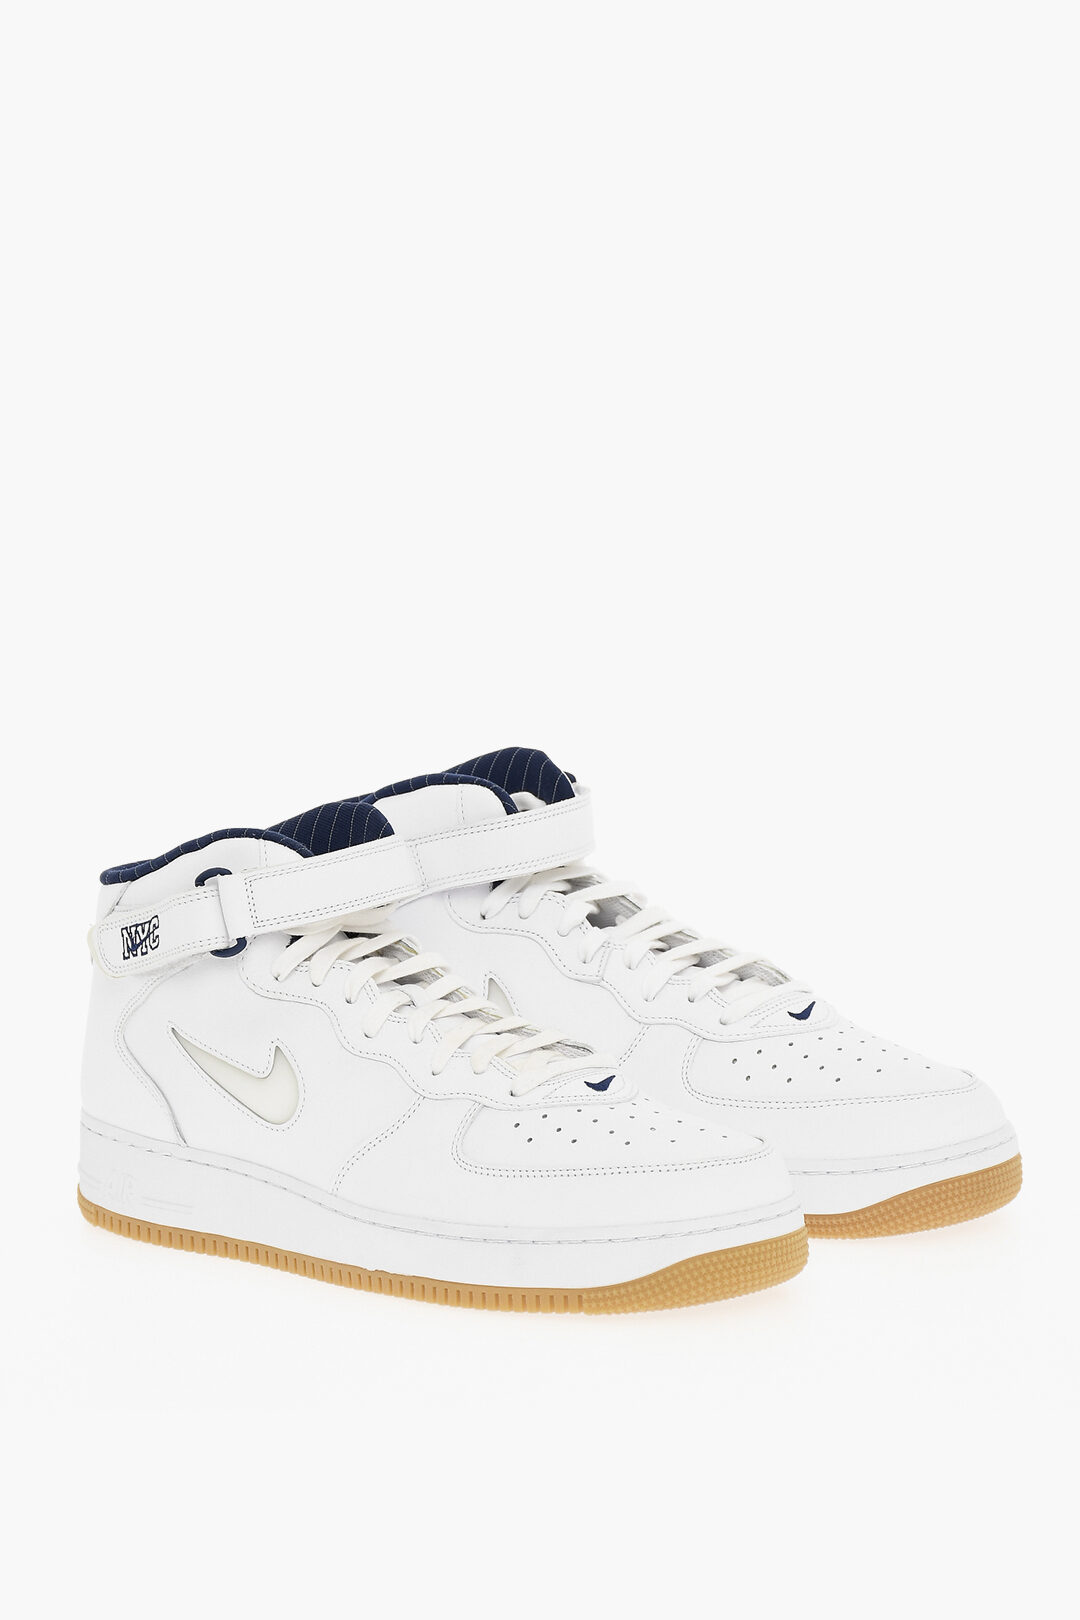 NIKE Air Force 1 '07 leather high-top sneakers